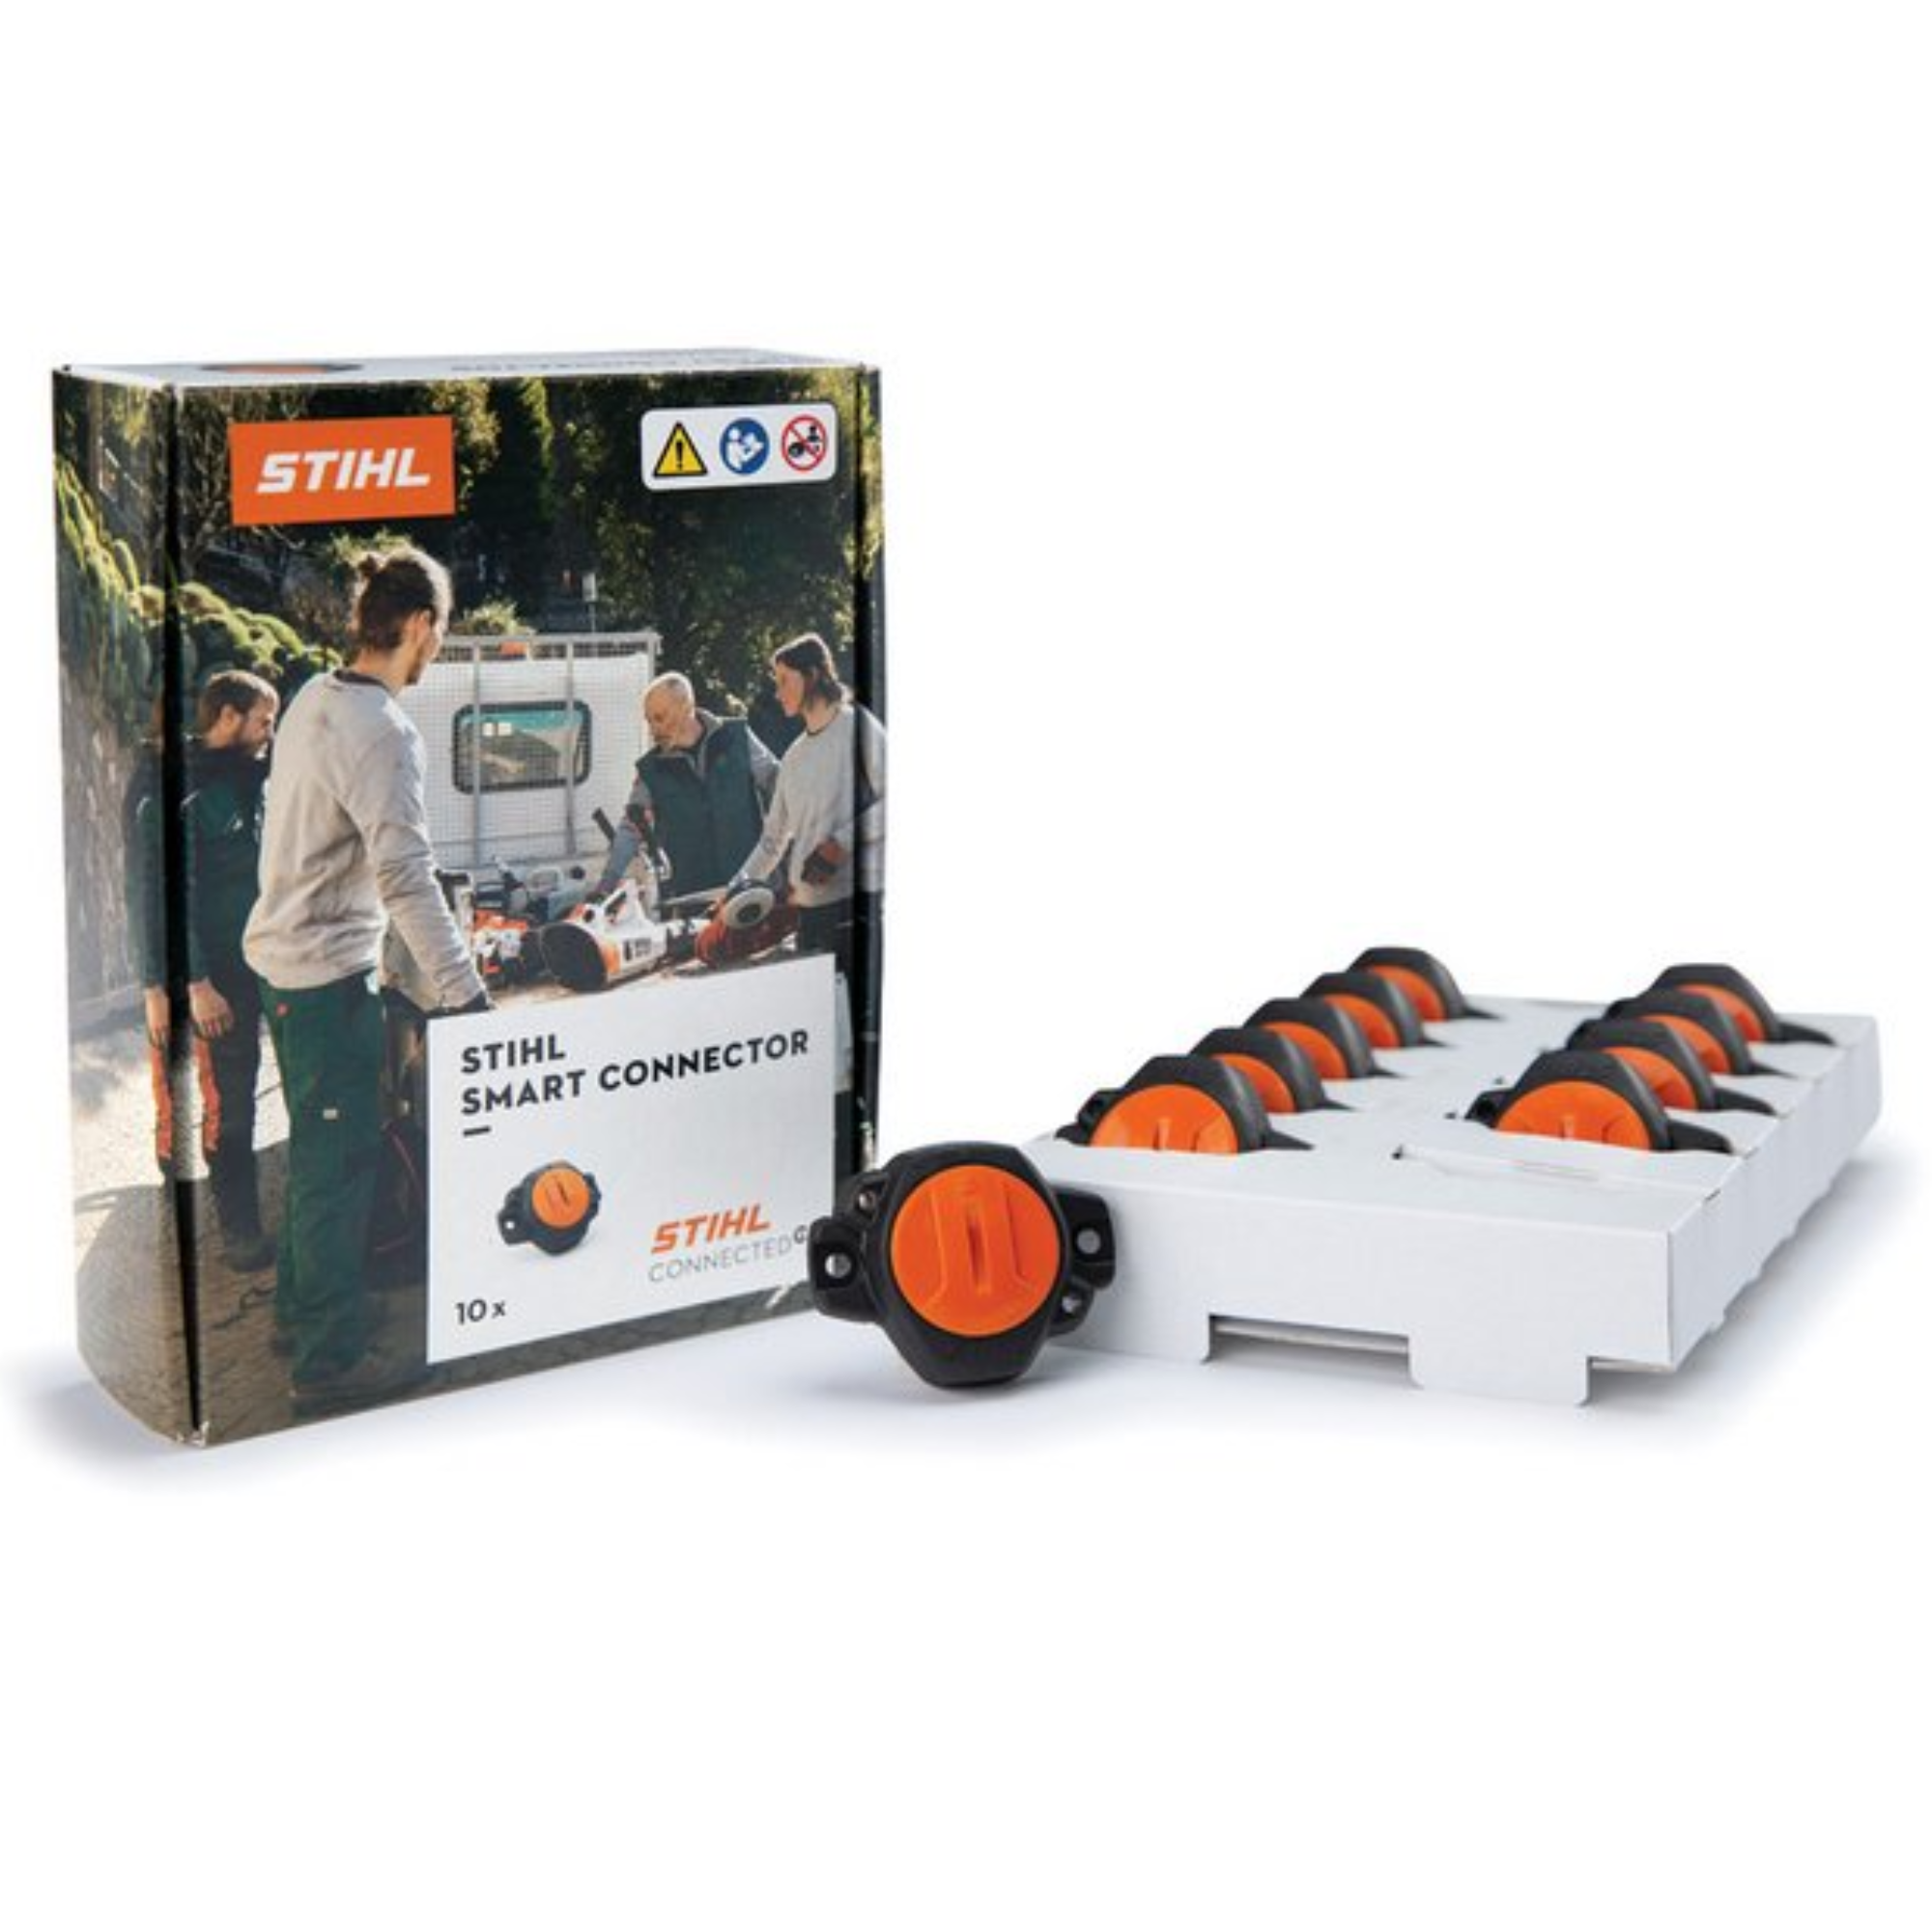 STIHL Smart Connector | 10 Pack | 0000 400 4904